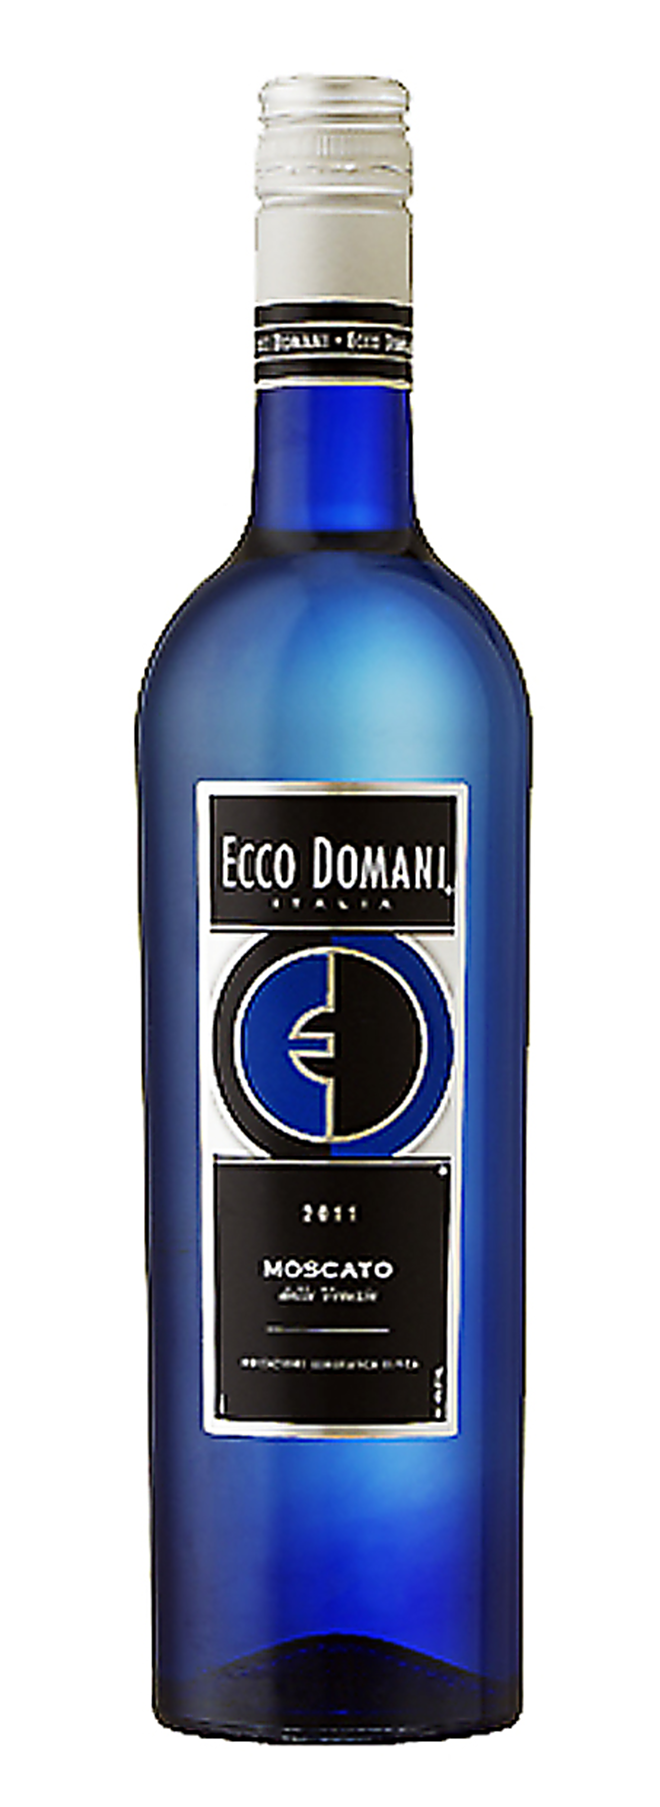 WHISTLE WHILE YOU DON’T WORK: Enjoy the long weekend with a great glass of vino. - ECCODOMANI.COM